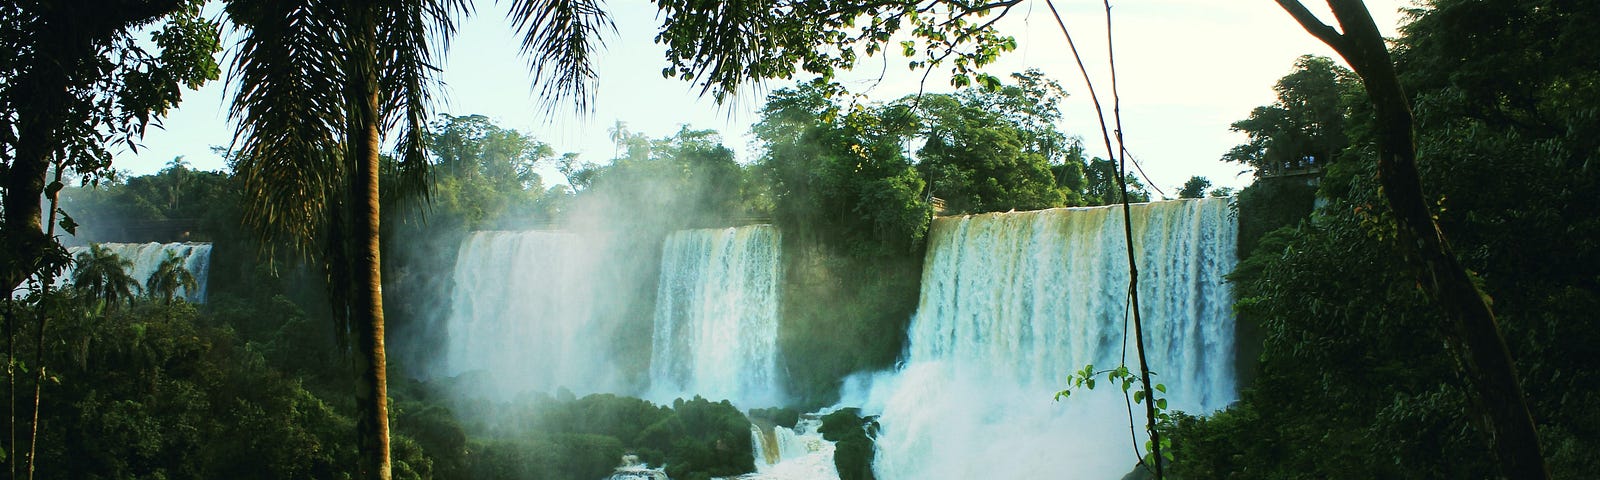 A series of waterfalls in a jungle.